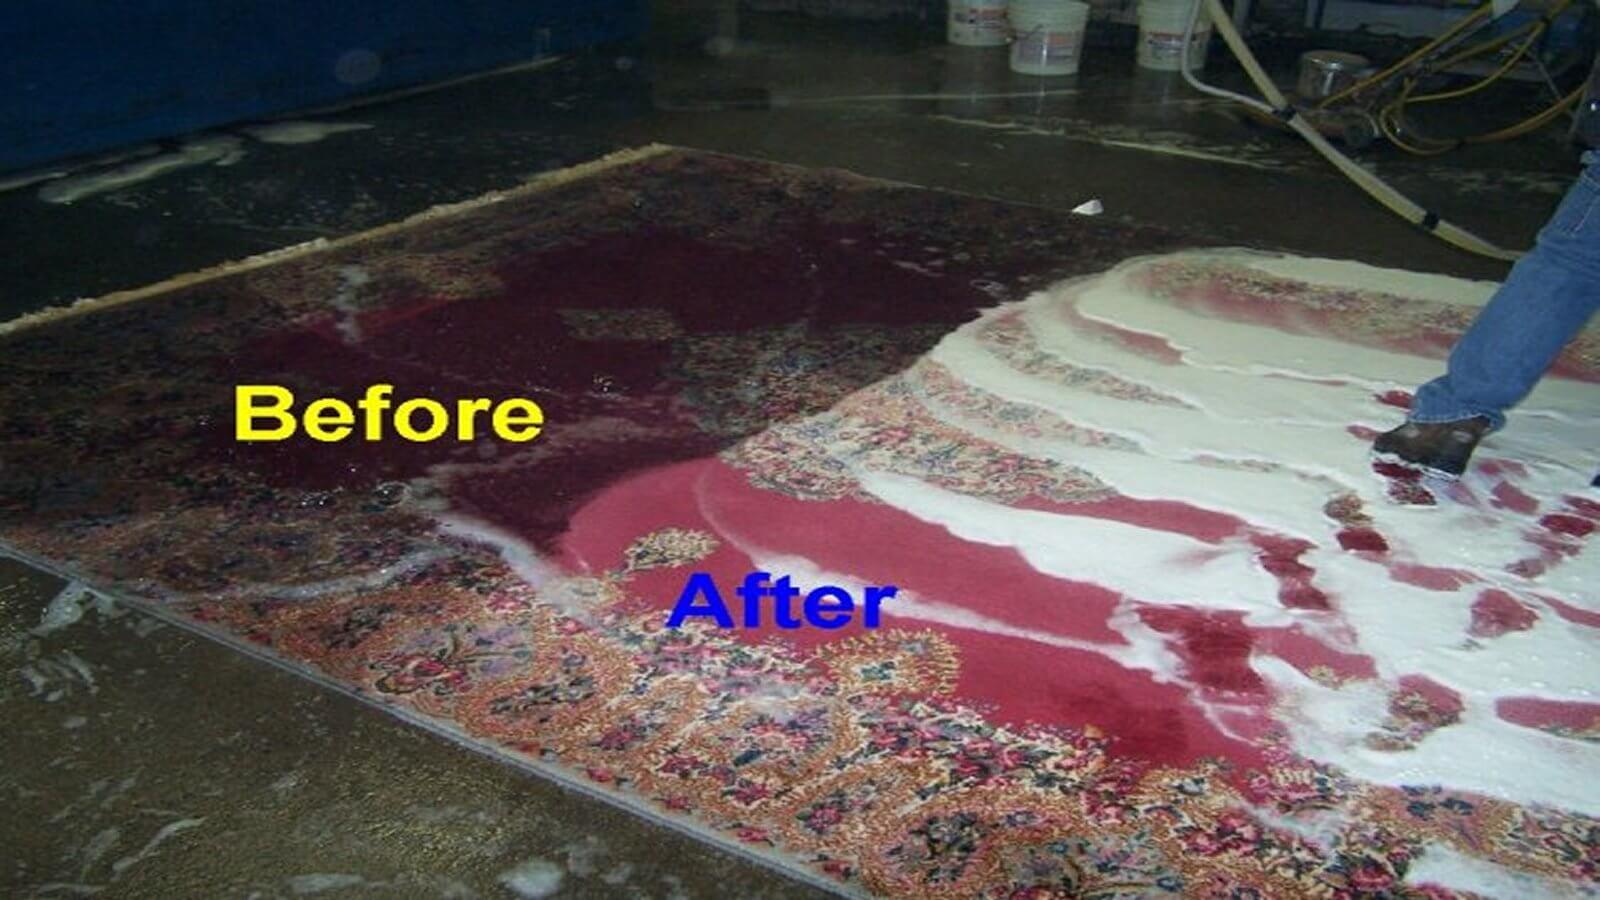 Oriental Rug Cleaning Rochester NY - Pinnacle Eco Clean